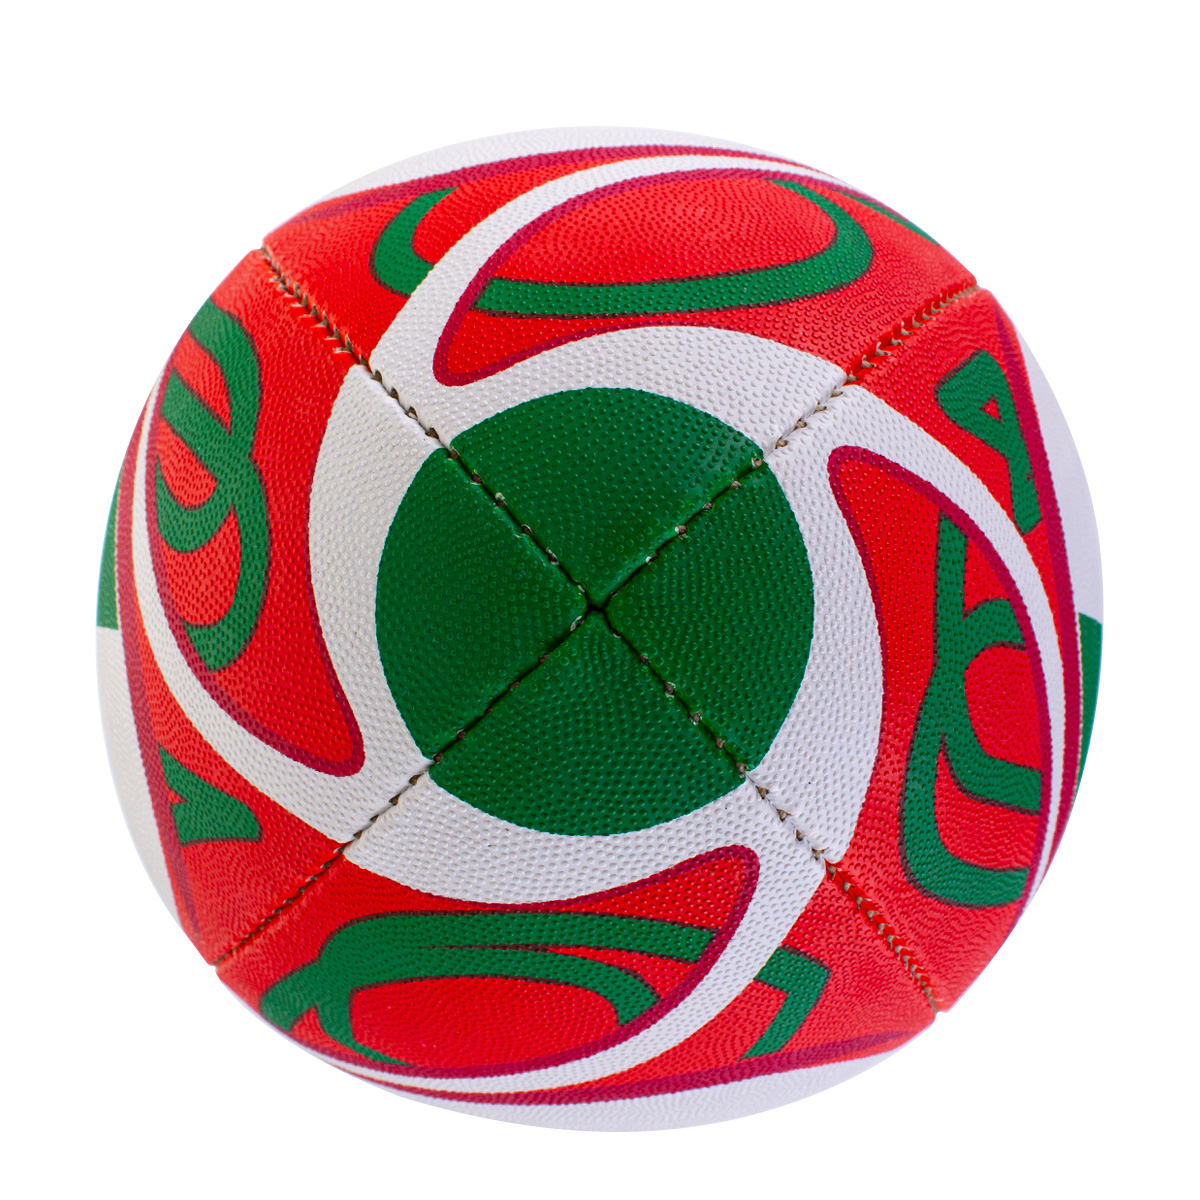 Rwc Wales Flag Rugby Ball End ?view=976&v=637999693200000000